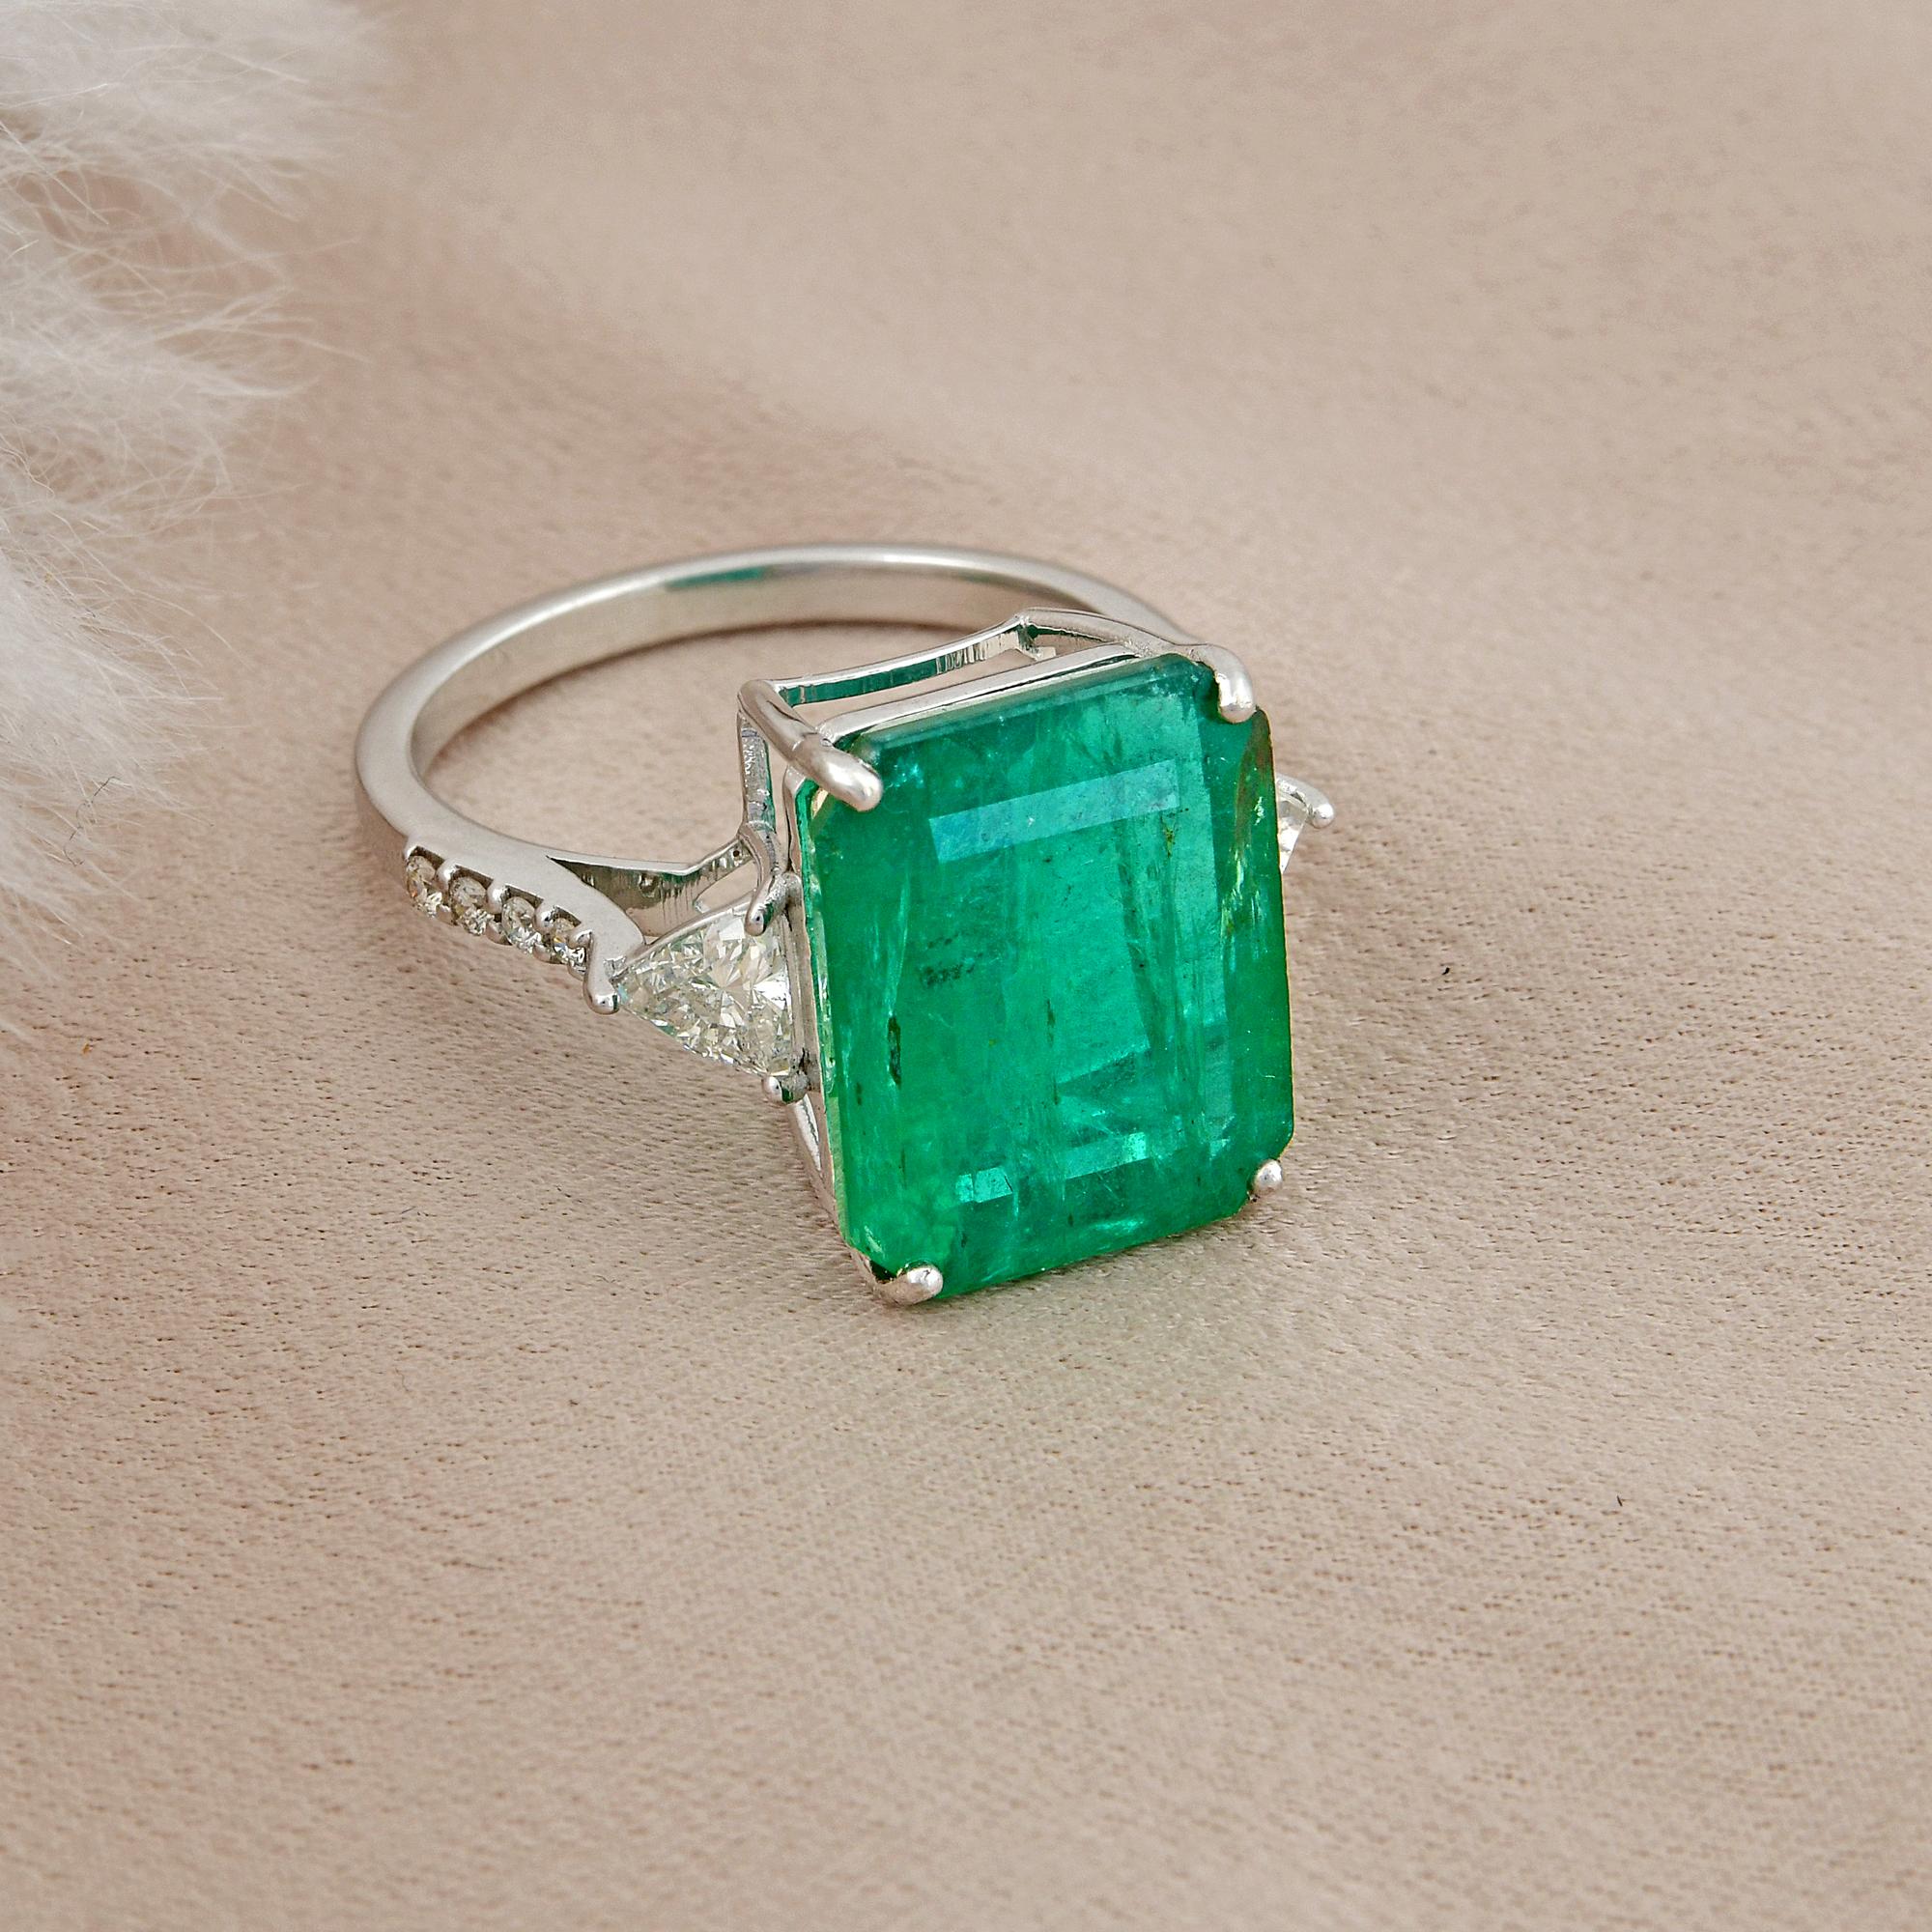 For Sale:  Natural Emerald Gemstone Ring Trillion Cut Diamond Solid 18k White Gold Jewelry 5